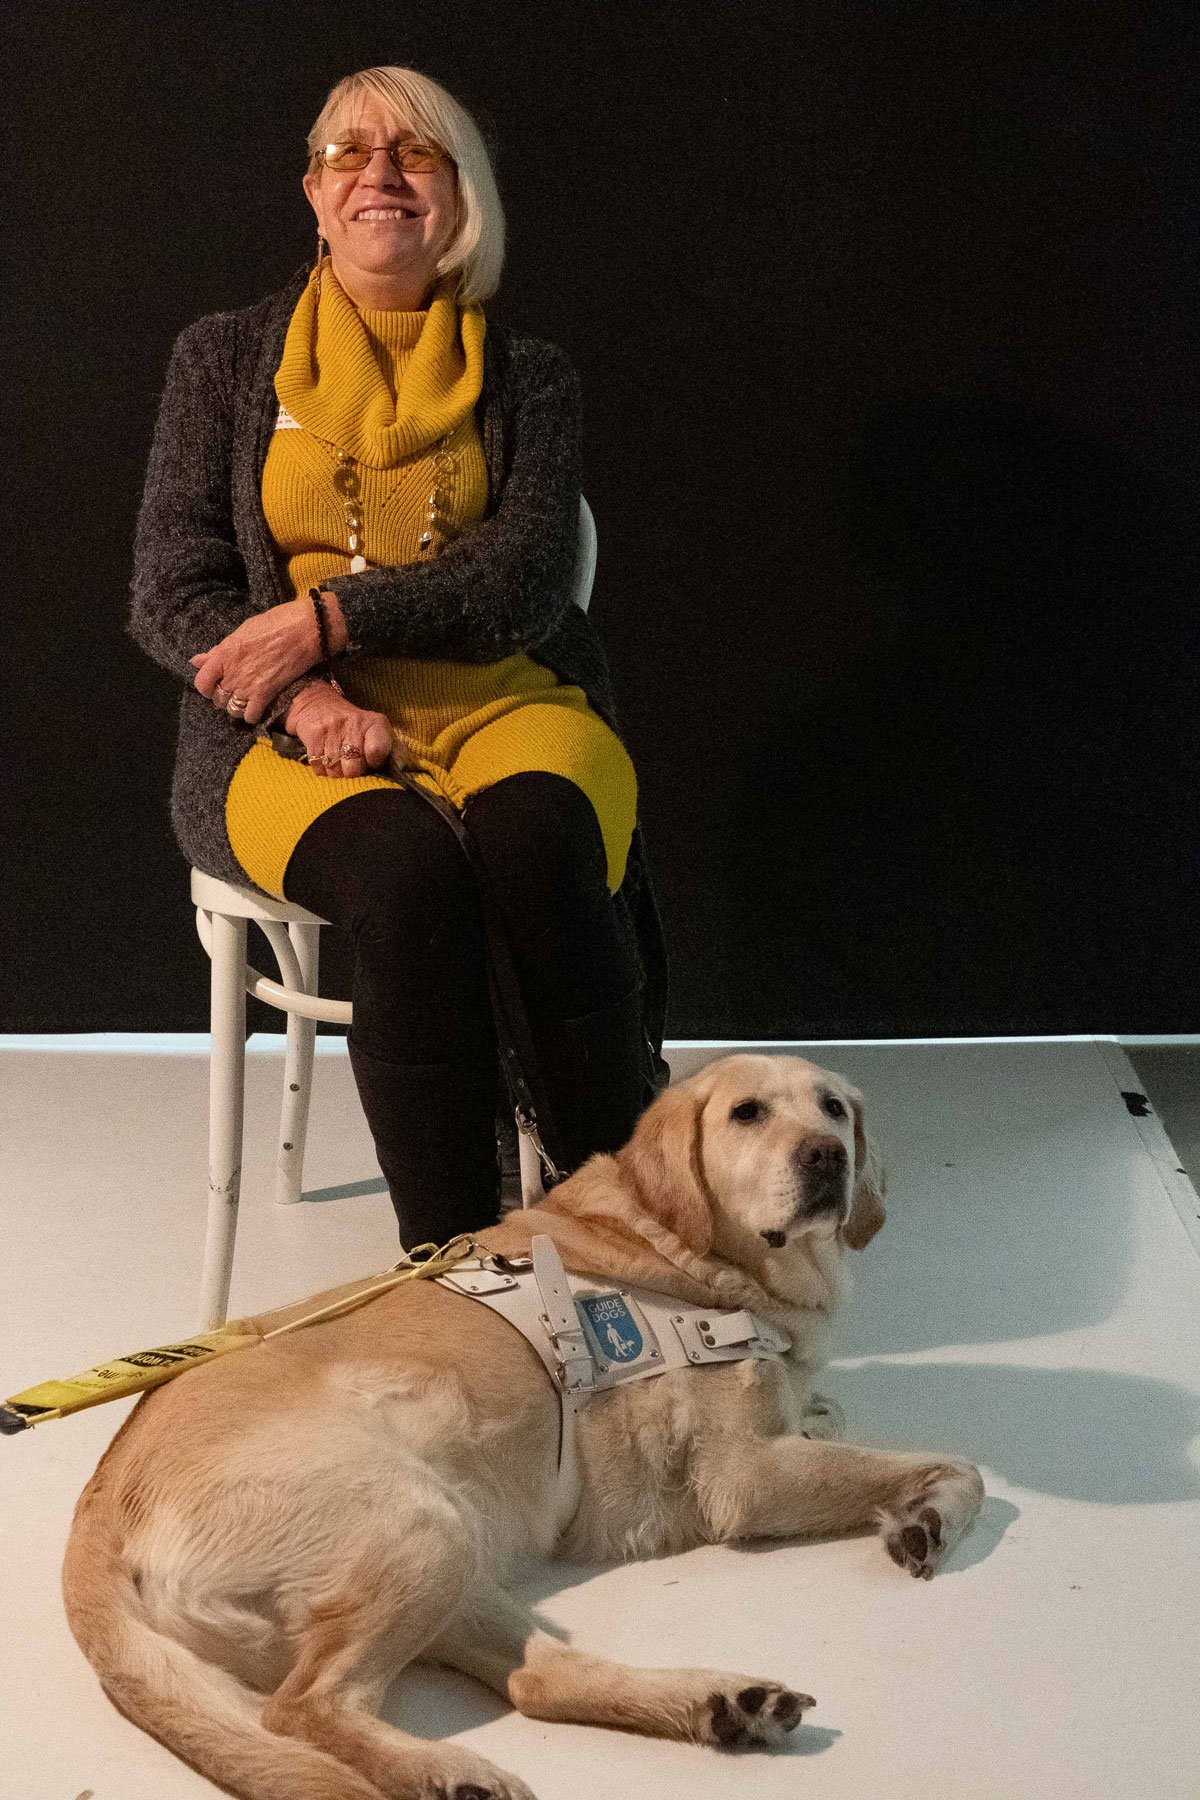 Studio photograph of a seated woman, smiling, with a blonde Labrador lying at her feet.